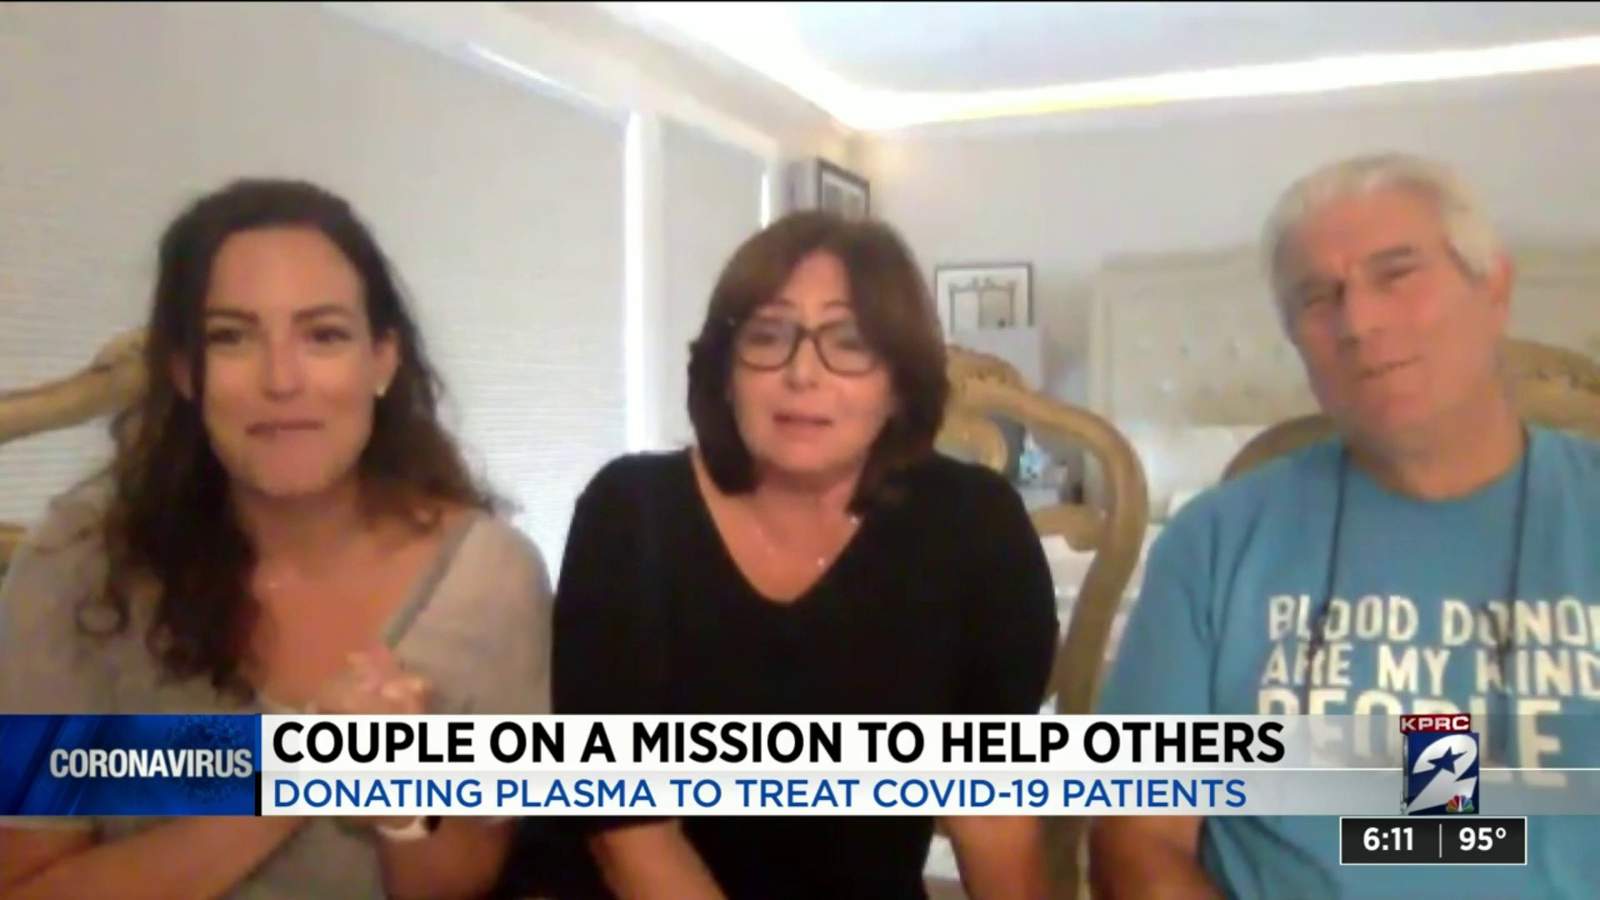 This local family’s COVID-19 journey led to them helping others through plasma donations